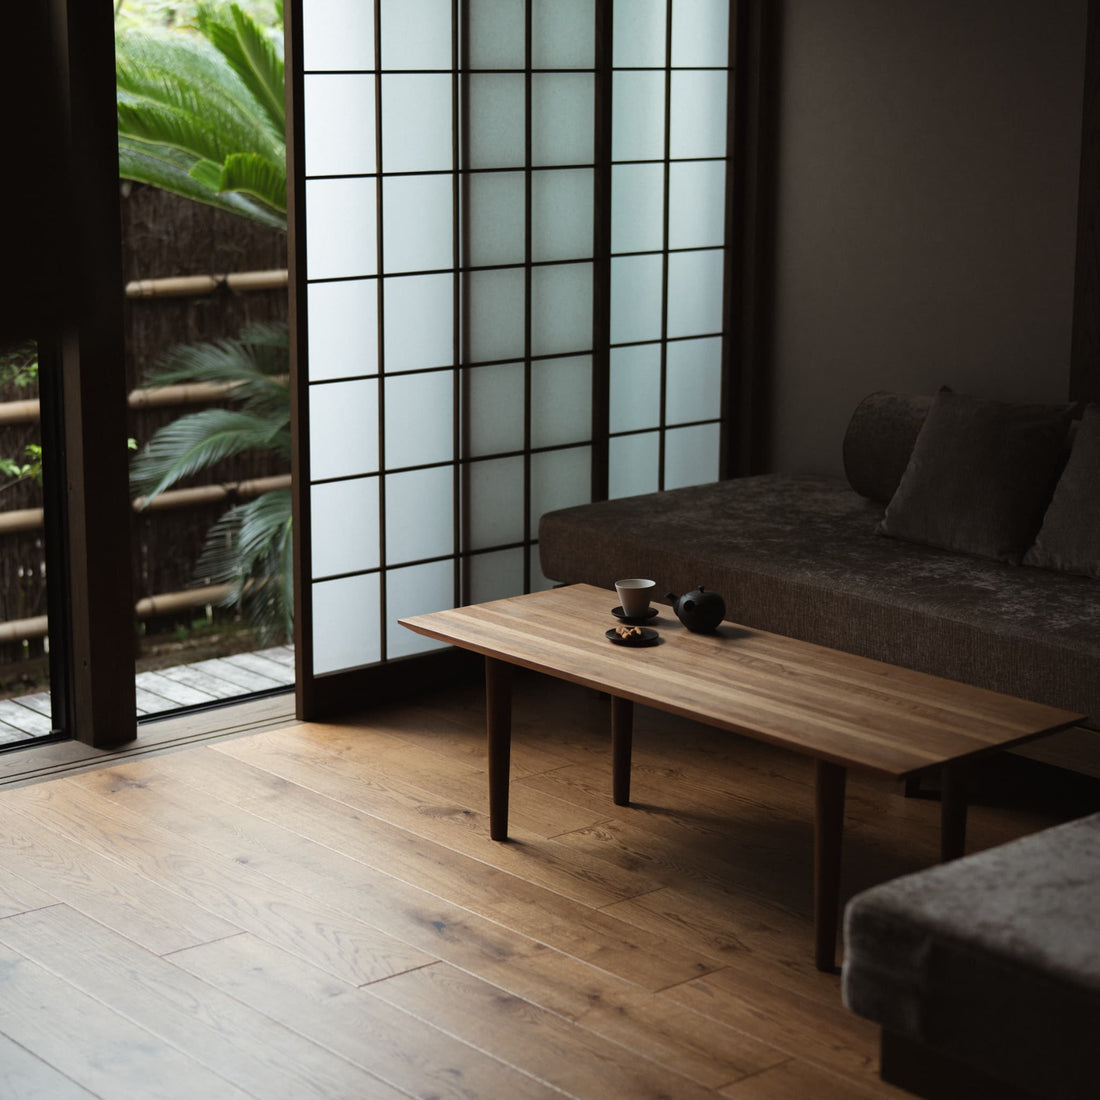 Homes Embodying Japanese Tradition: The Aesthetics and Living Culture of Japan